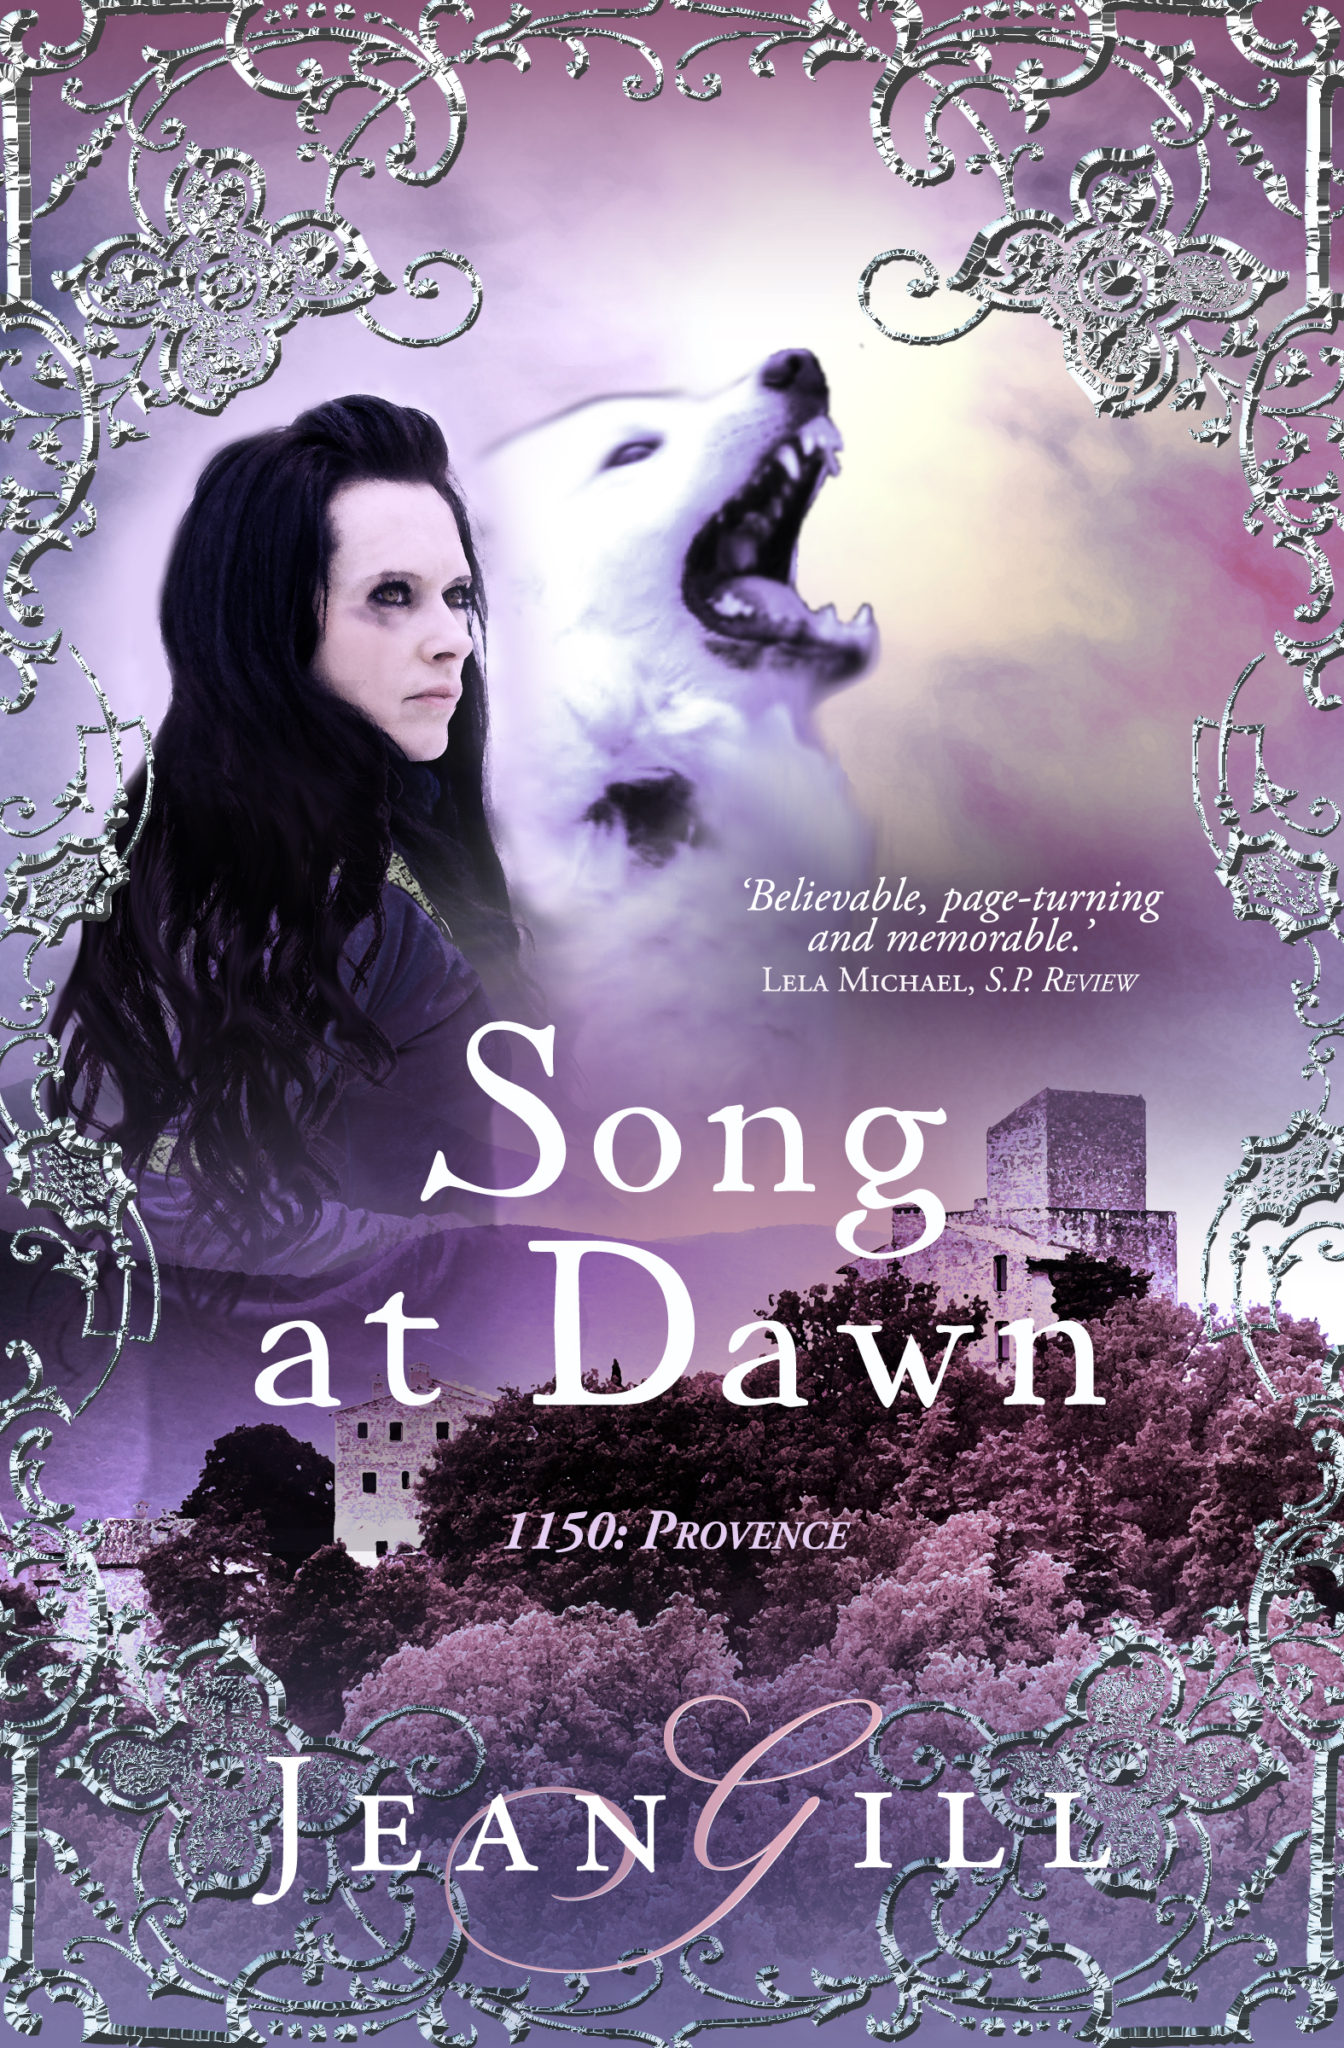 FREE: Song at Dawn by Jean Gill